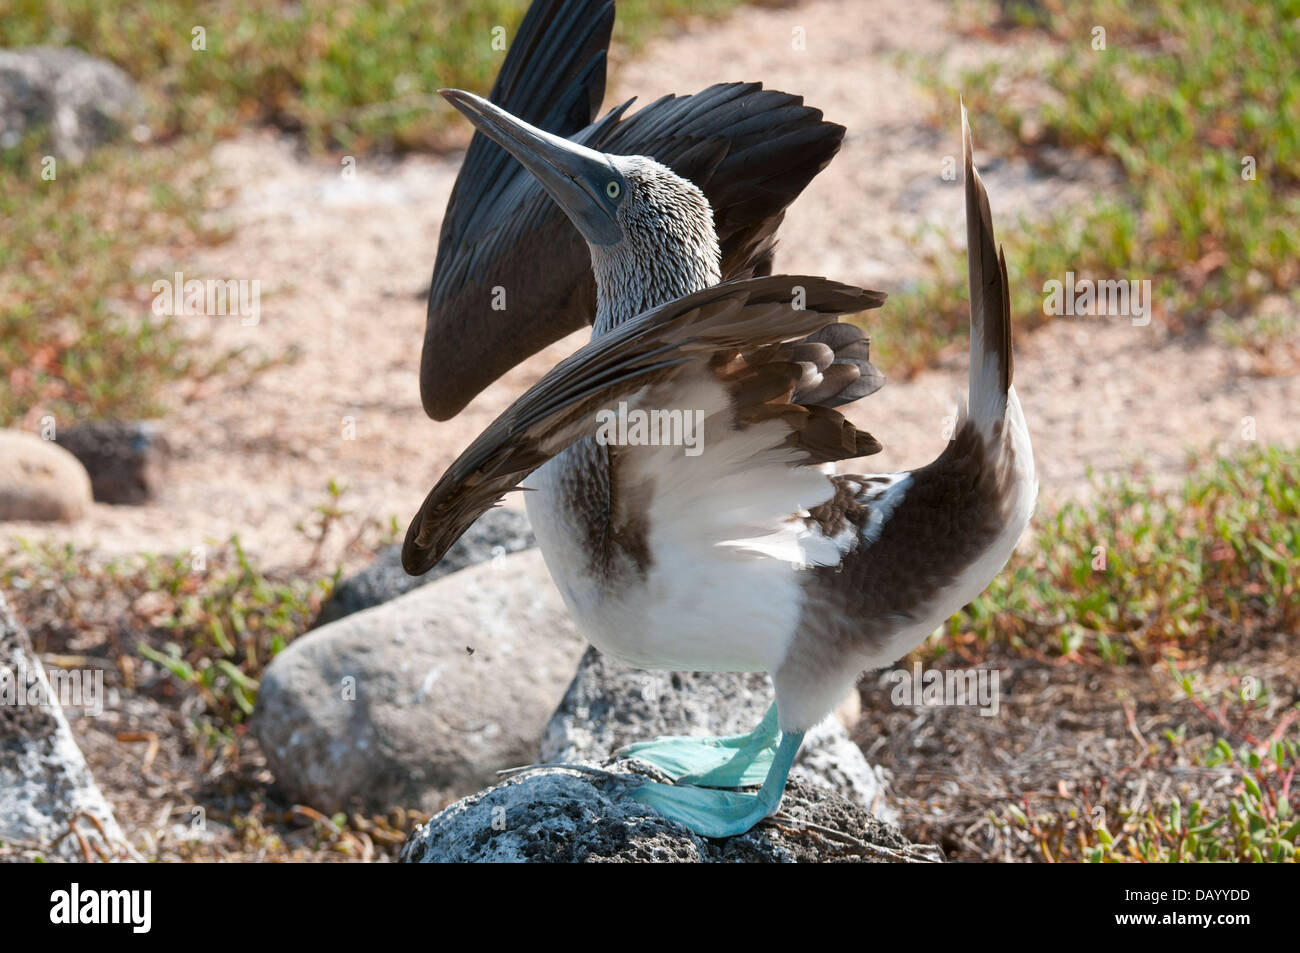 Stock photo of a blue-footed booby displaying breeding behavior Stock Photo